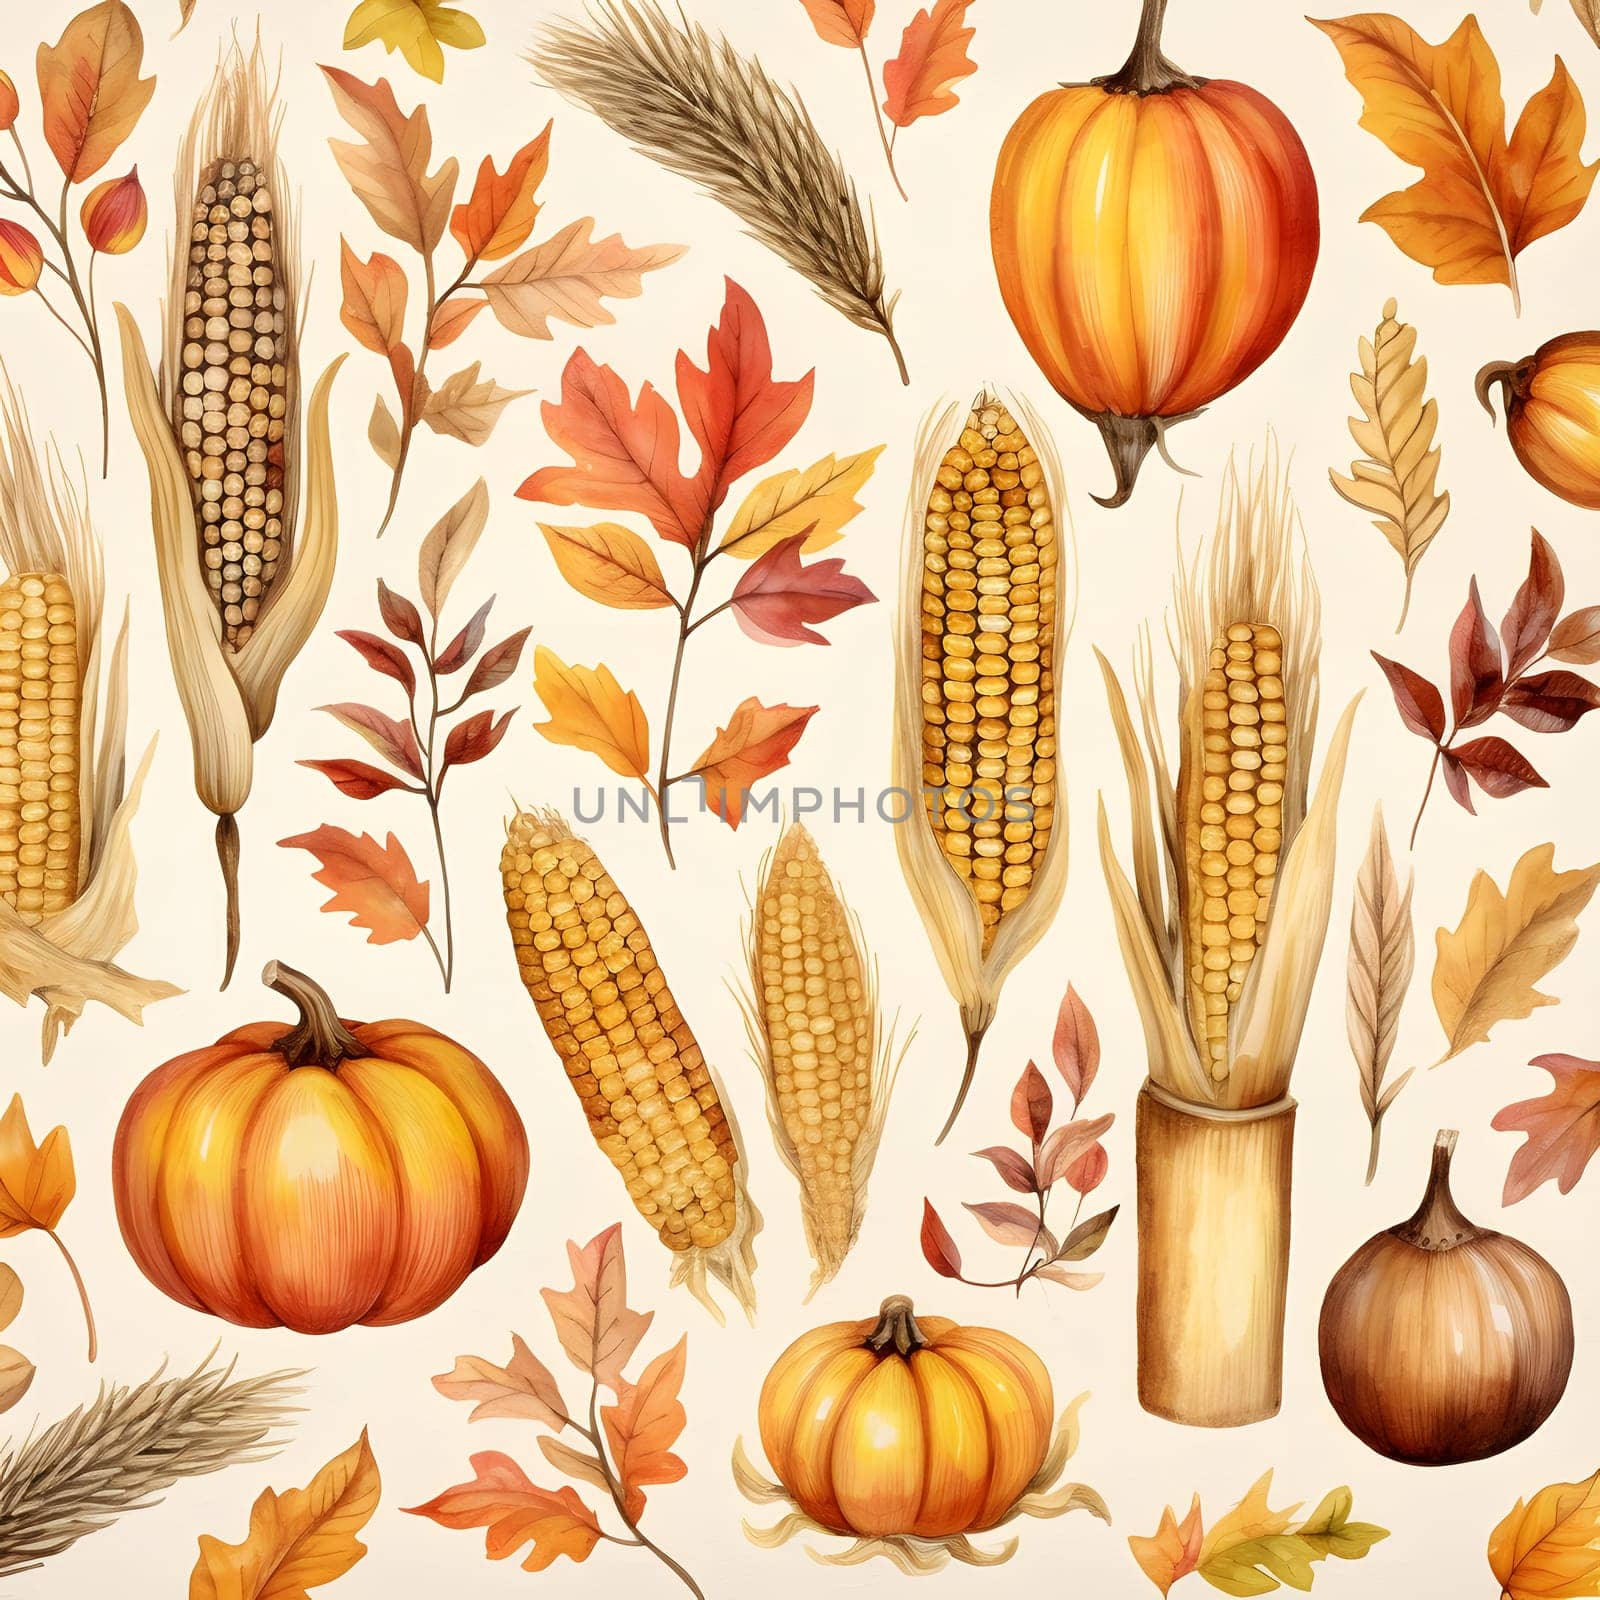 Elegant and modern. Corns, cobs, leaves, pumpkins, as abstract background, wallpaper, banner, texture design with pattern - vector. White colors.